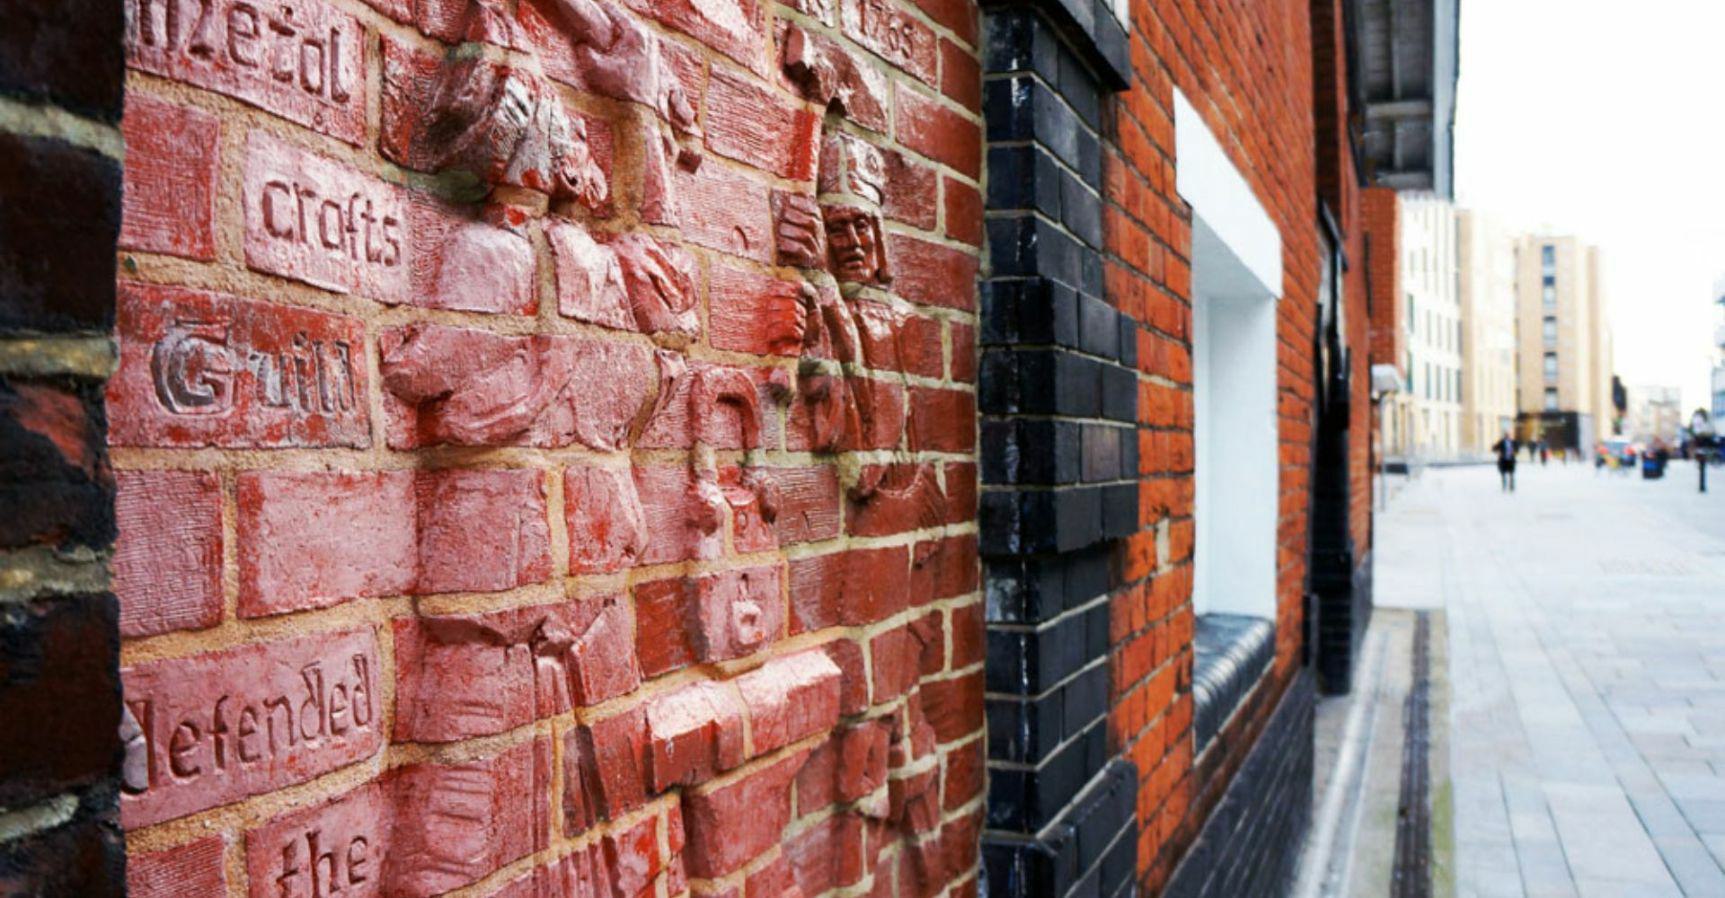 Defenders of the East Gate sculpture on a brick wall